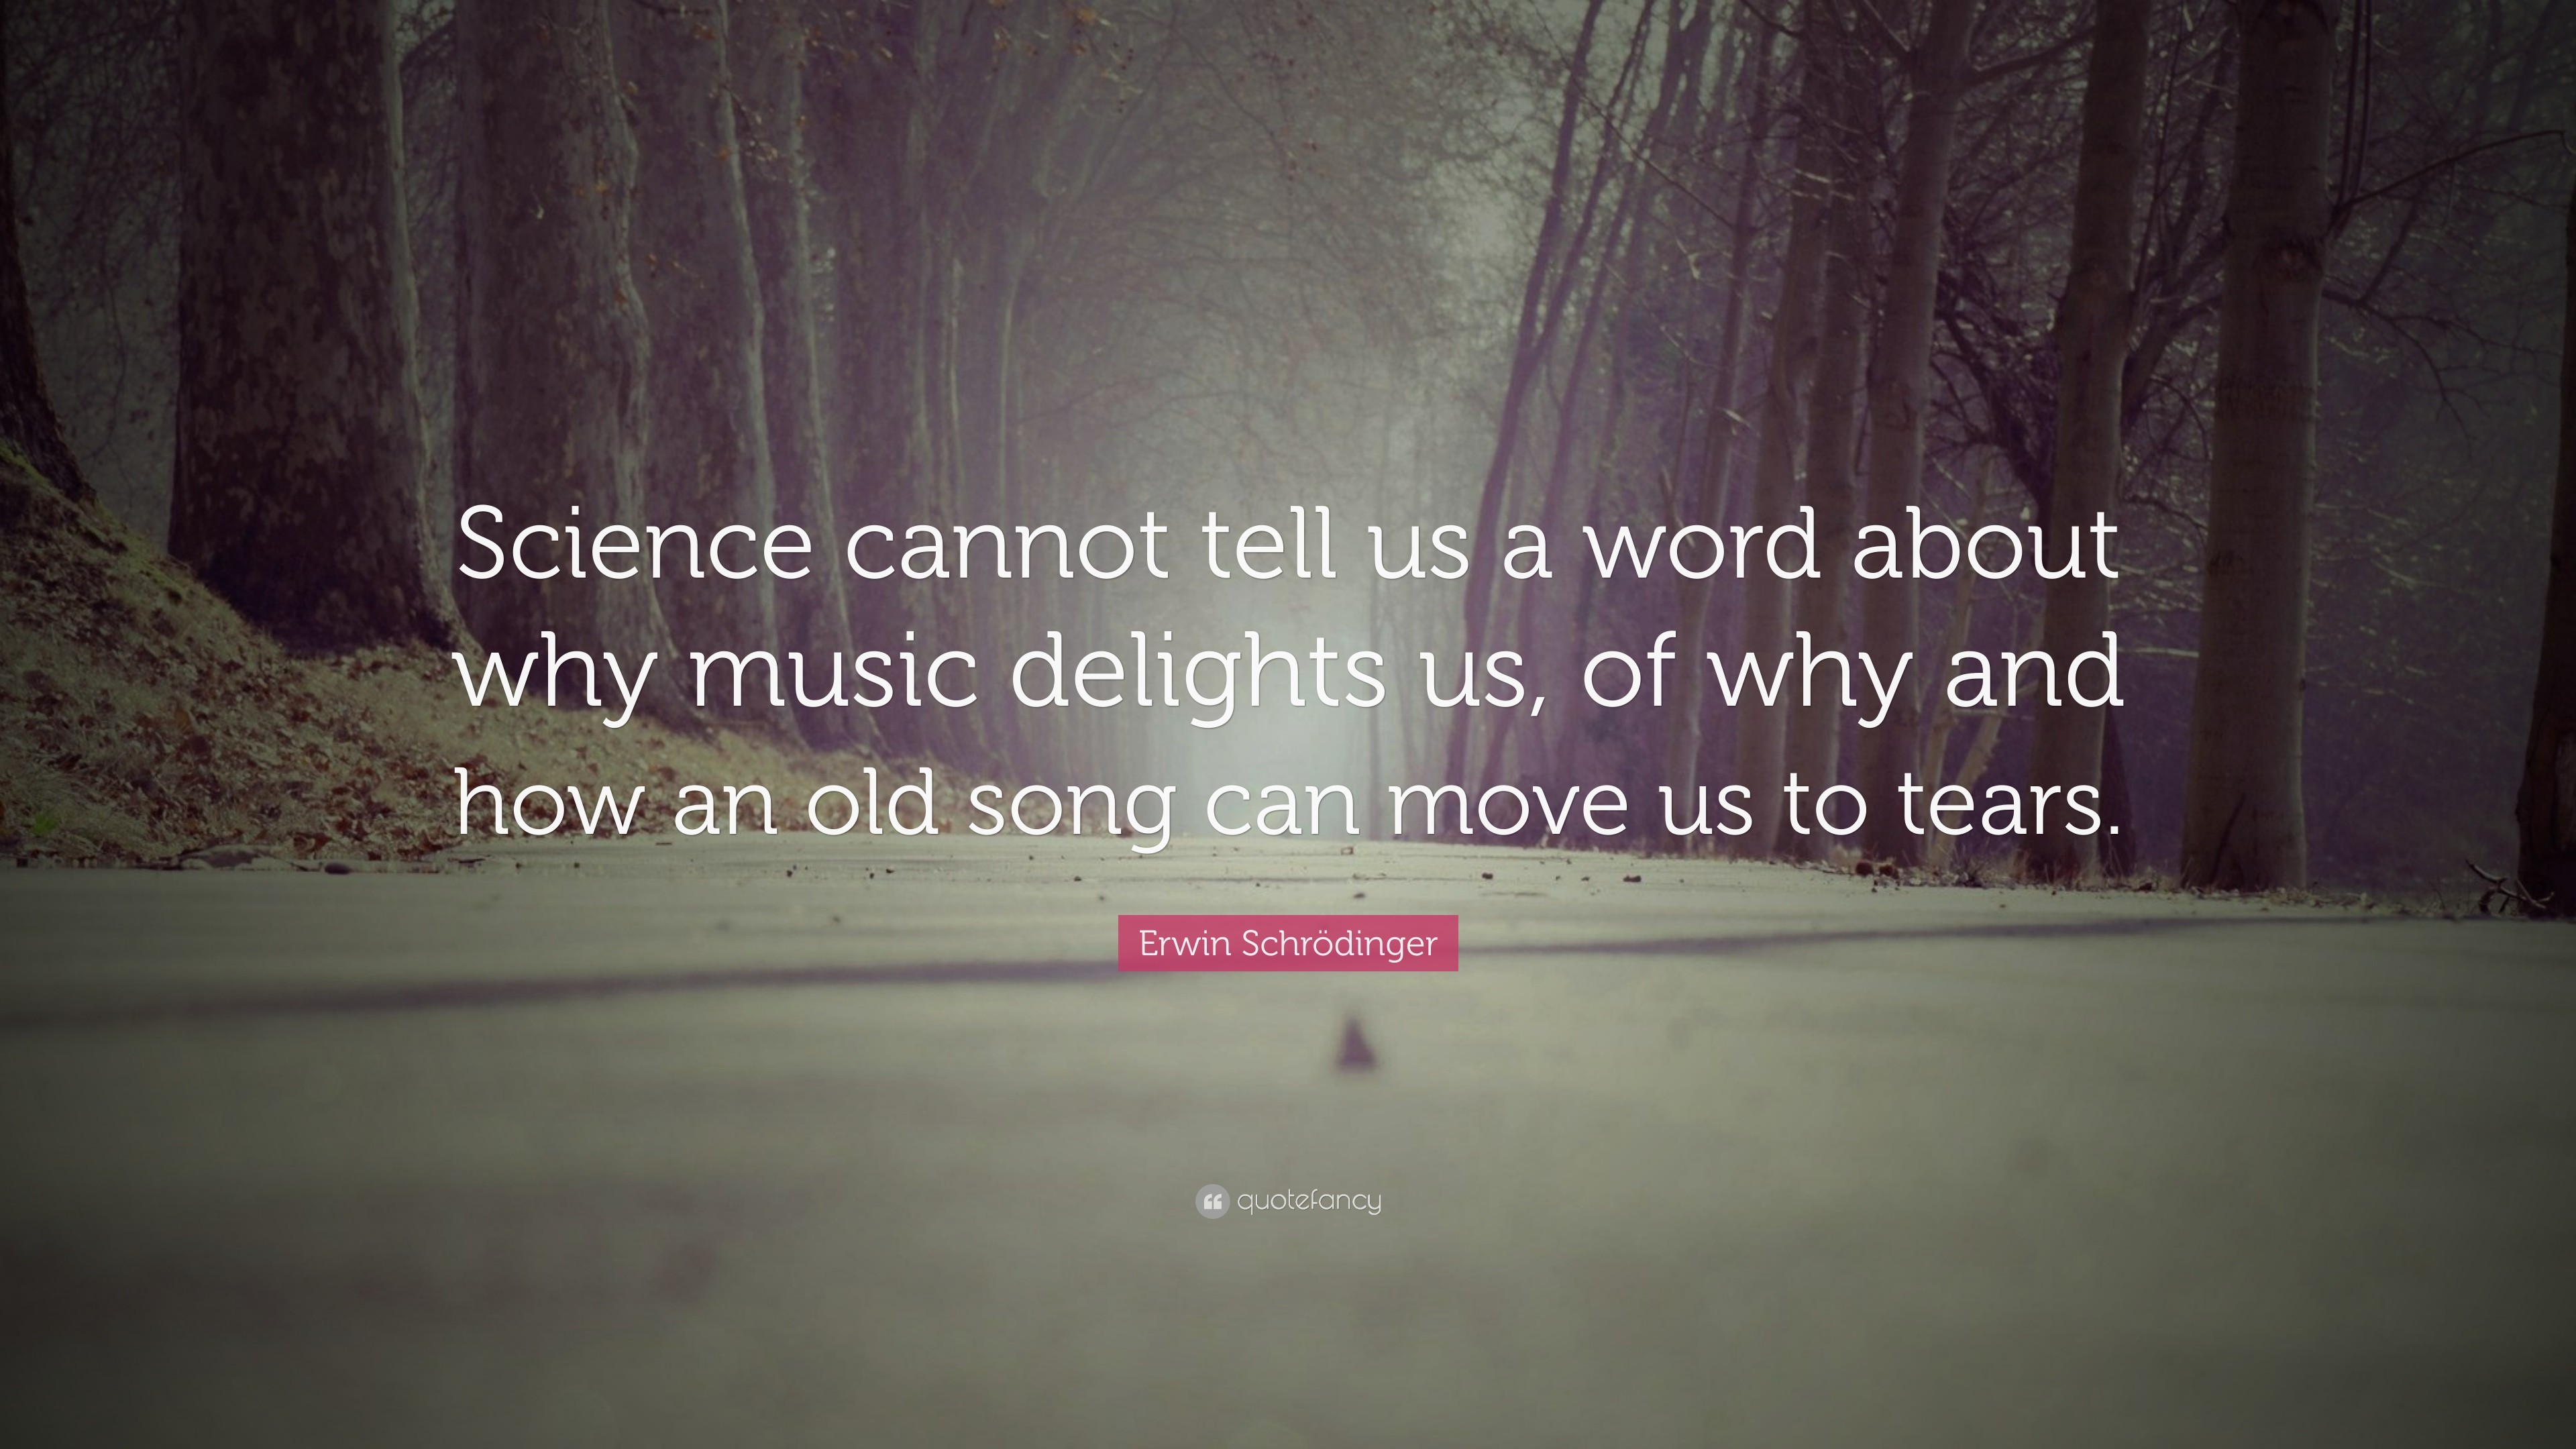 3840x2160 Erwin SchrÃ¶dinger Quote: “Science cannot tell us a word about why music  delights us